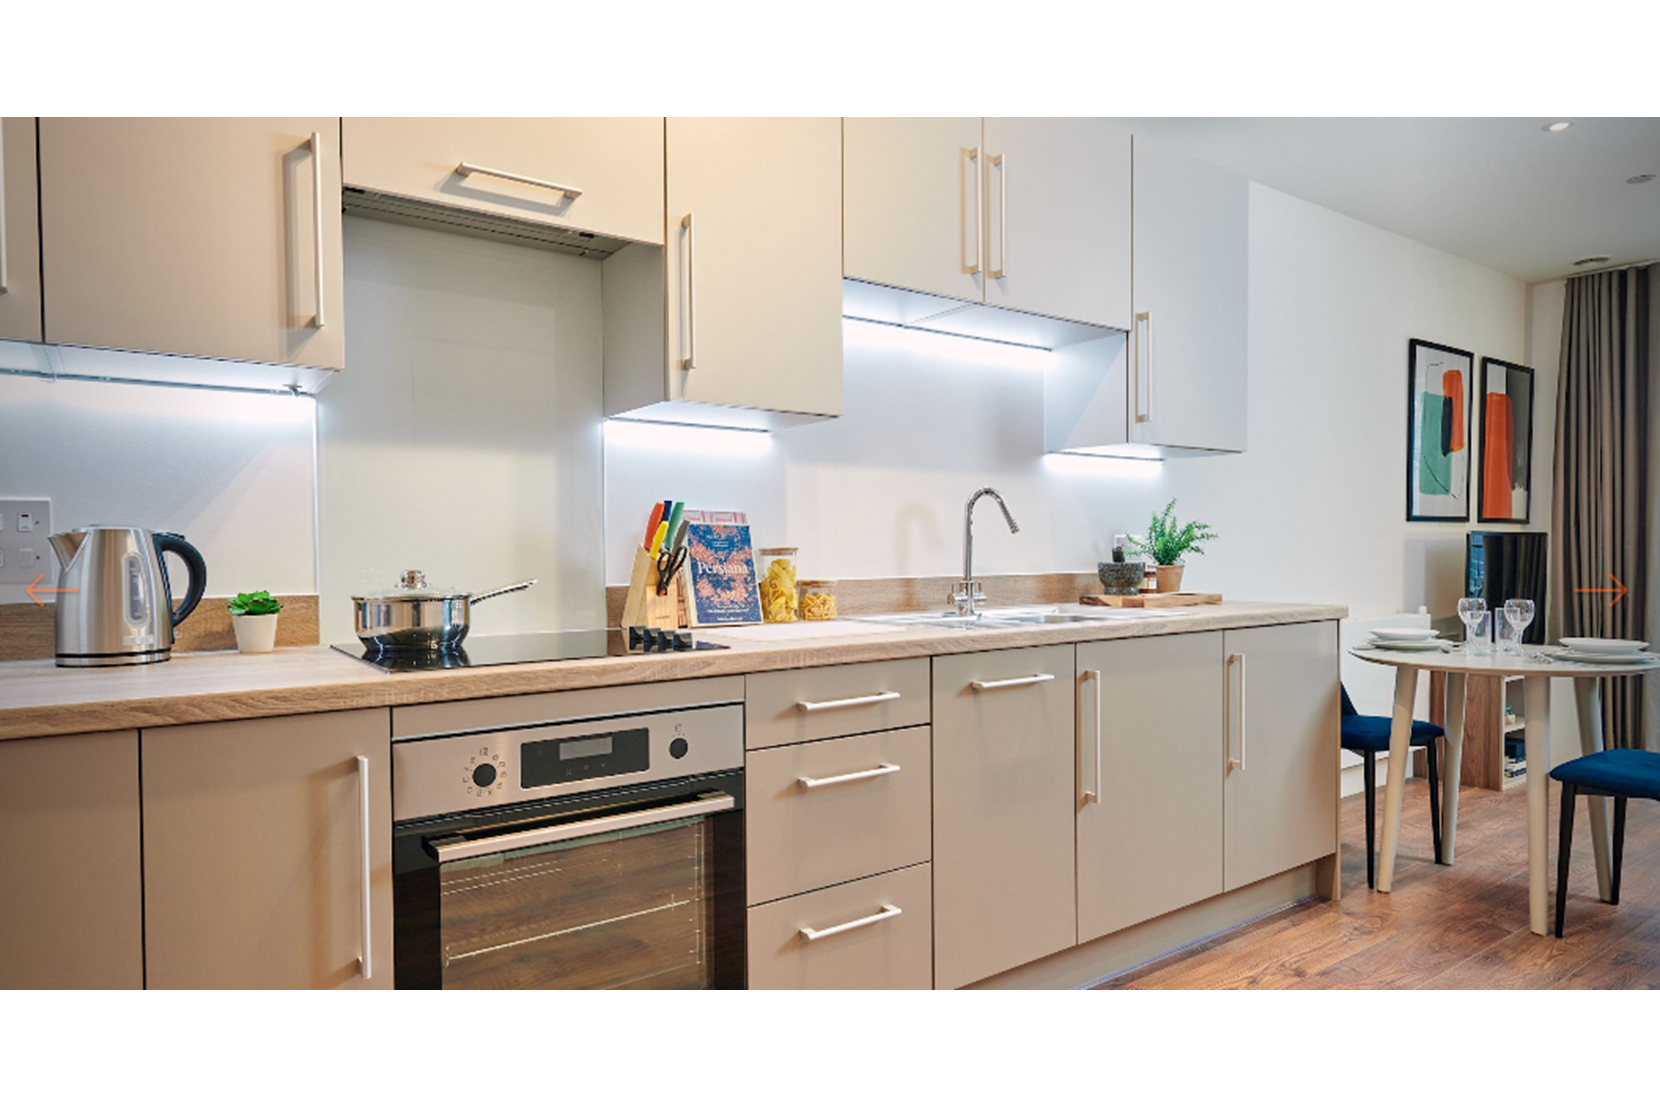 Apartment-APO-Group-Barking-Greater-London-interior-kitchen-dining-area